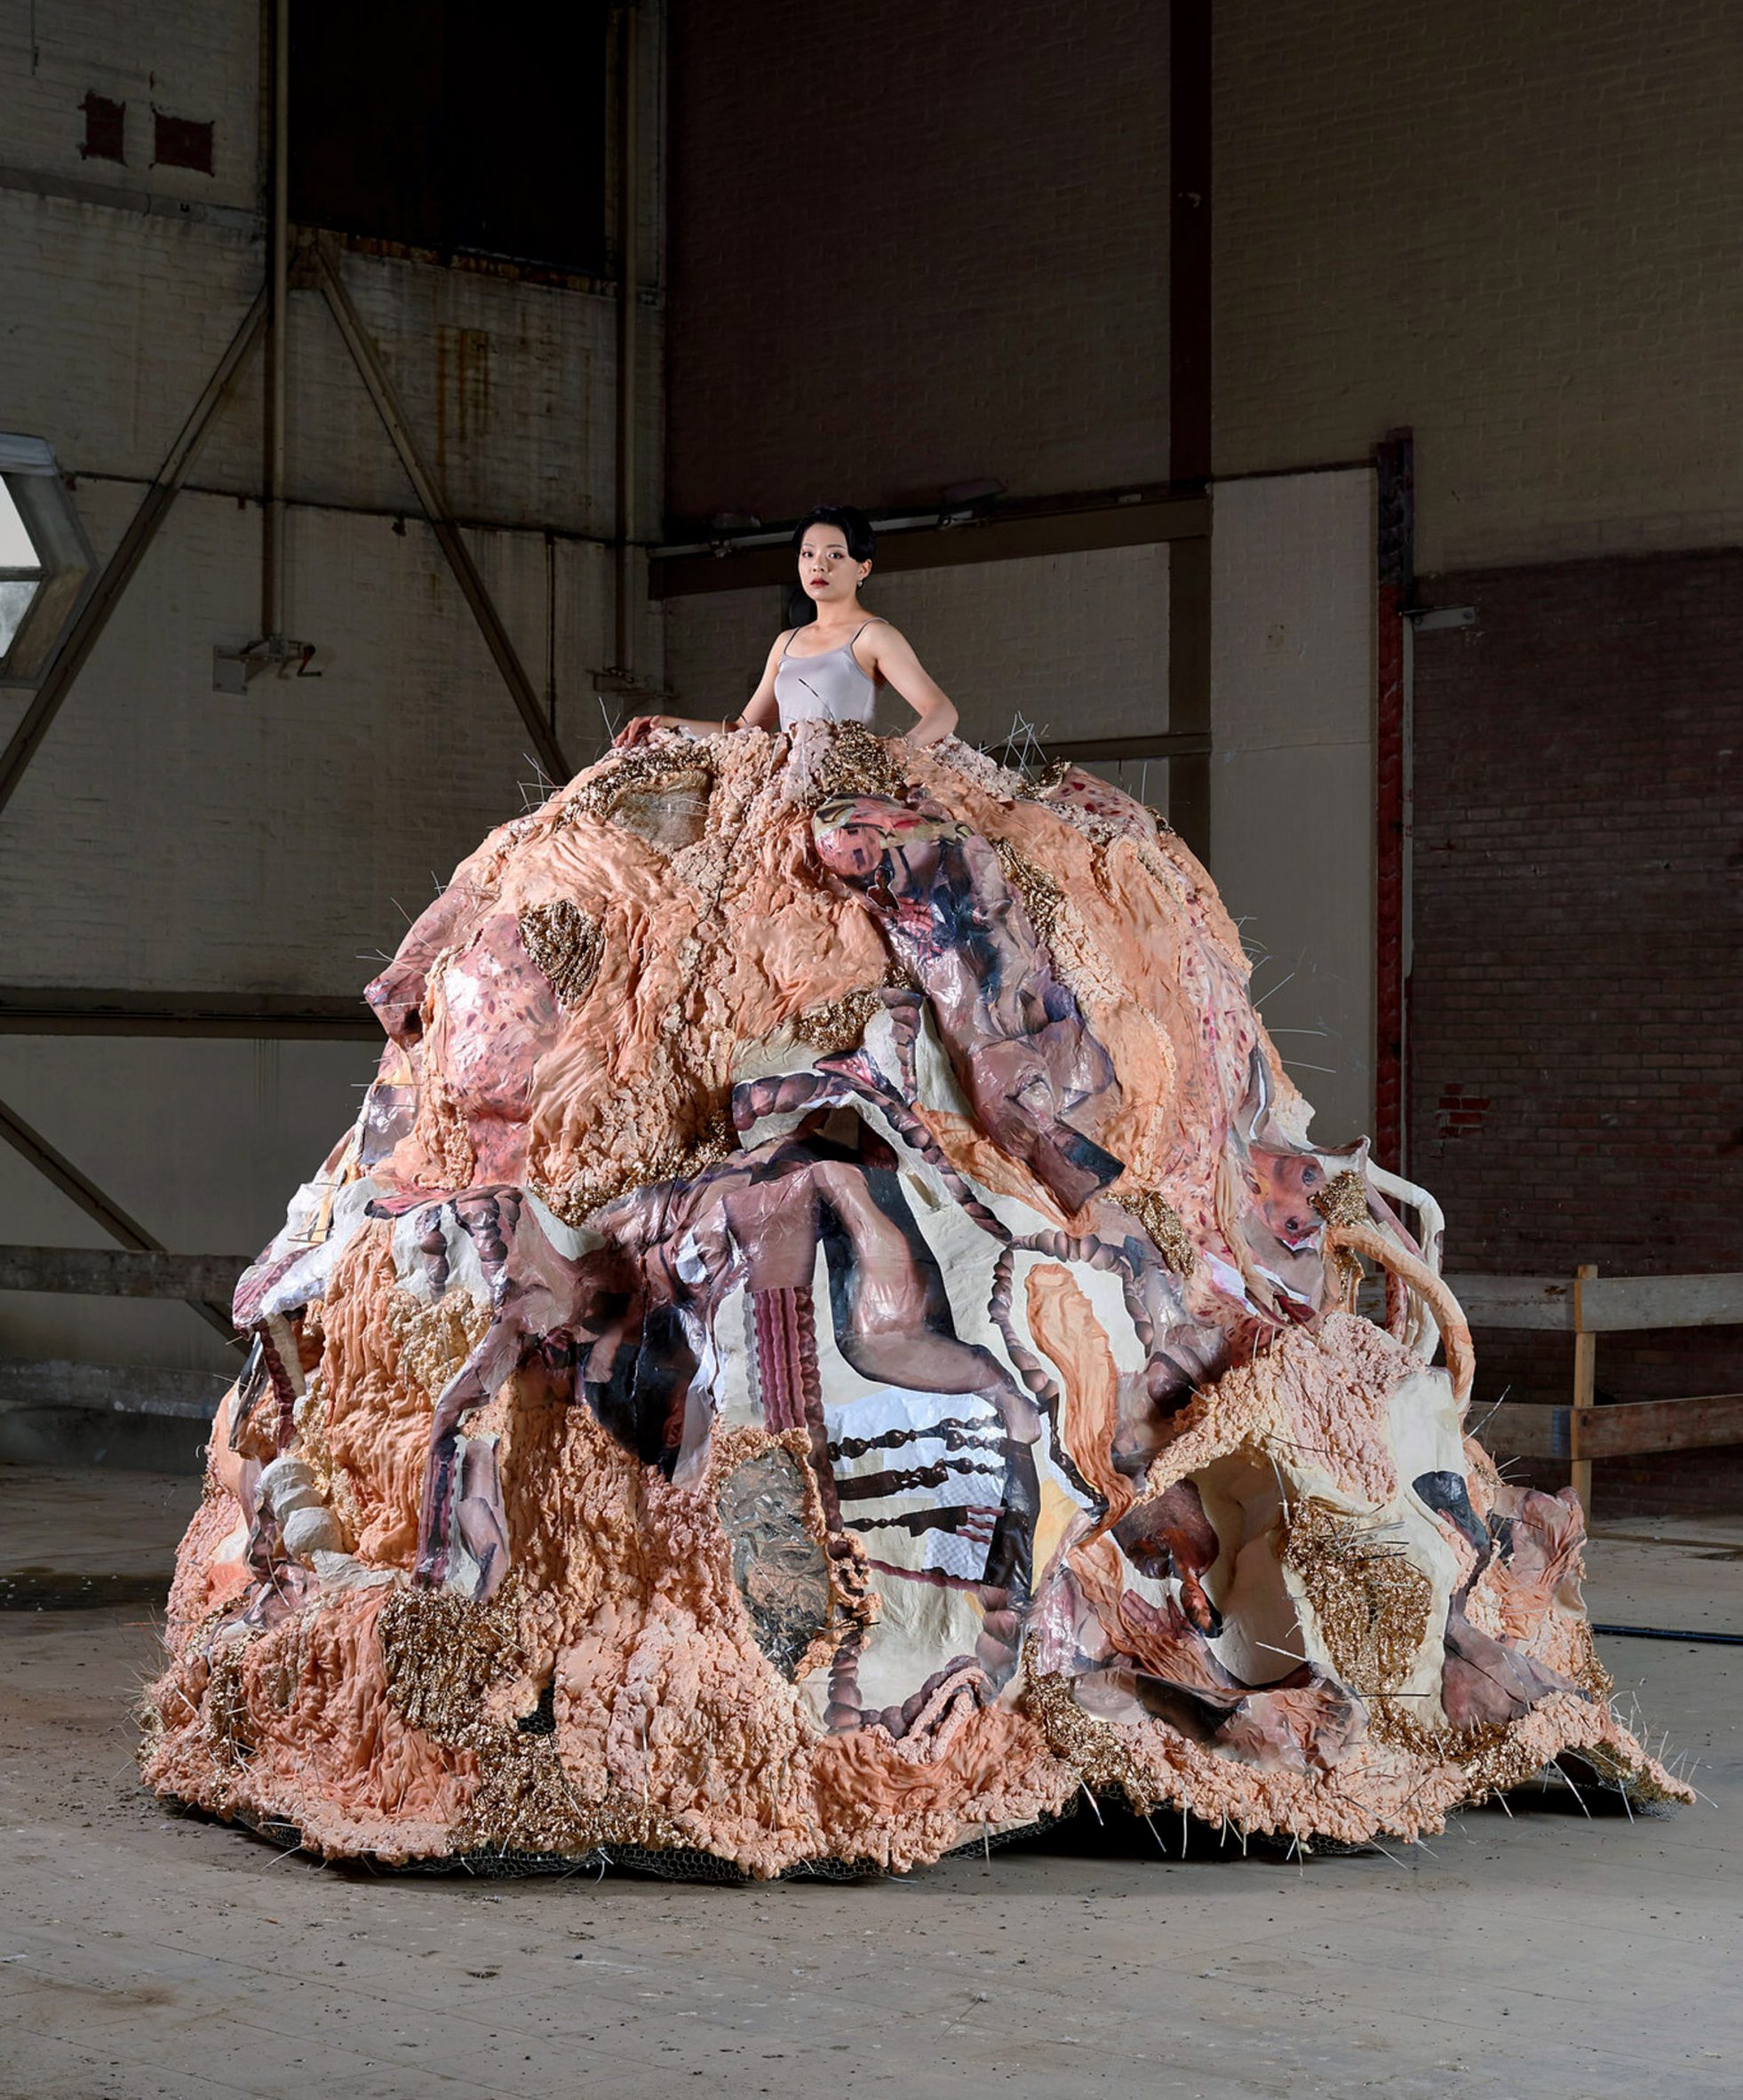 To-be-looked-at-ness is a giant dress created by Design Academy Eindhoven graduate Hsin Min Chan